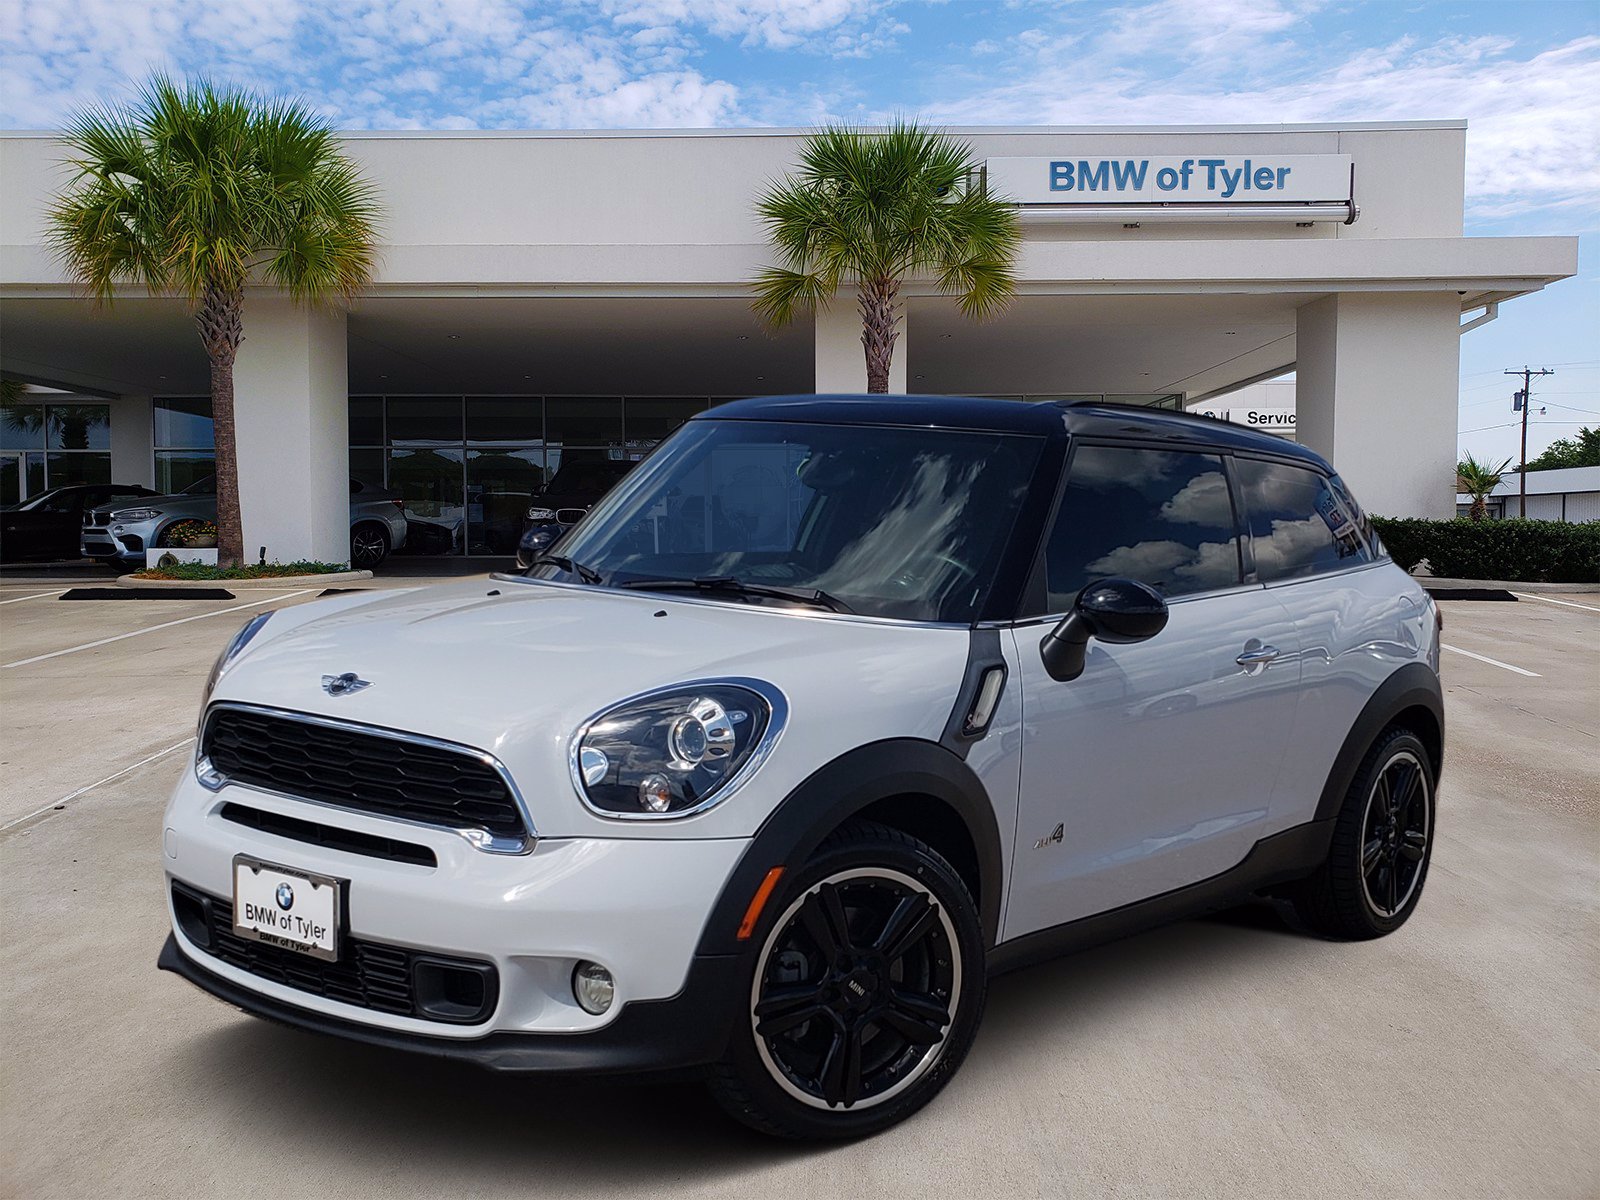 Pre-Owned 2013 MINI Cooper Paceman S ALL4 2dr Car in Fayetteville # ...